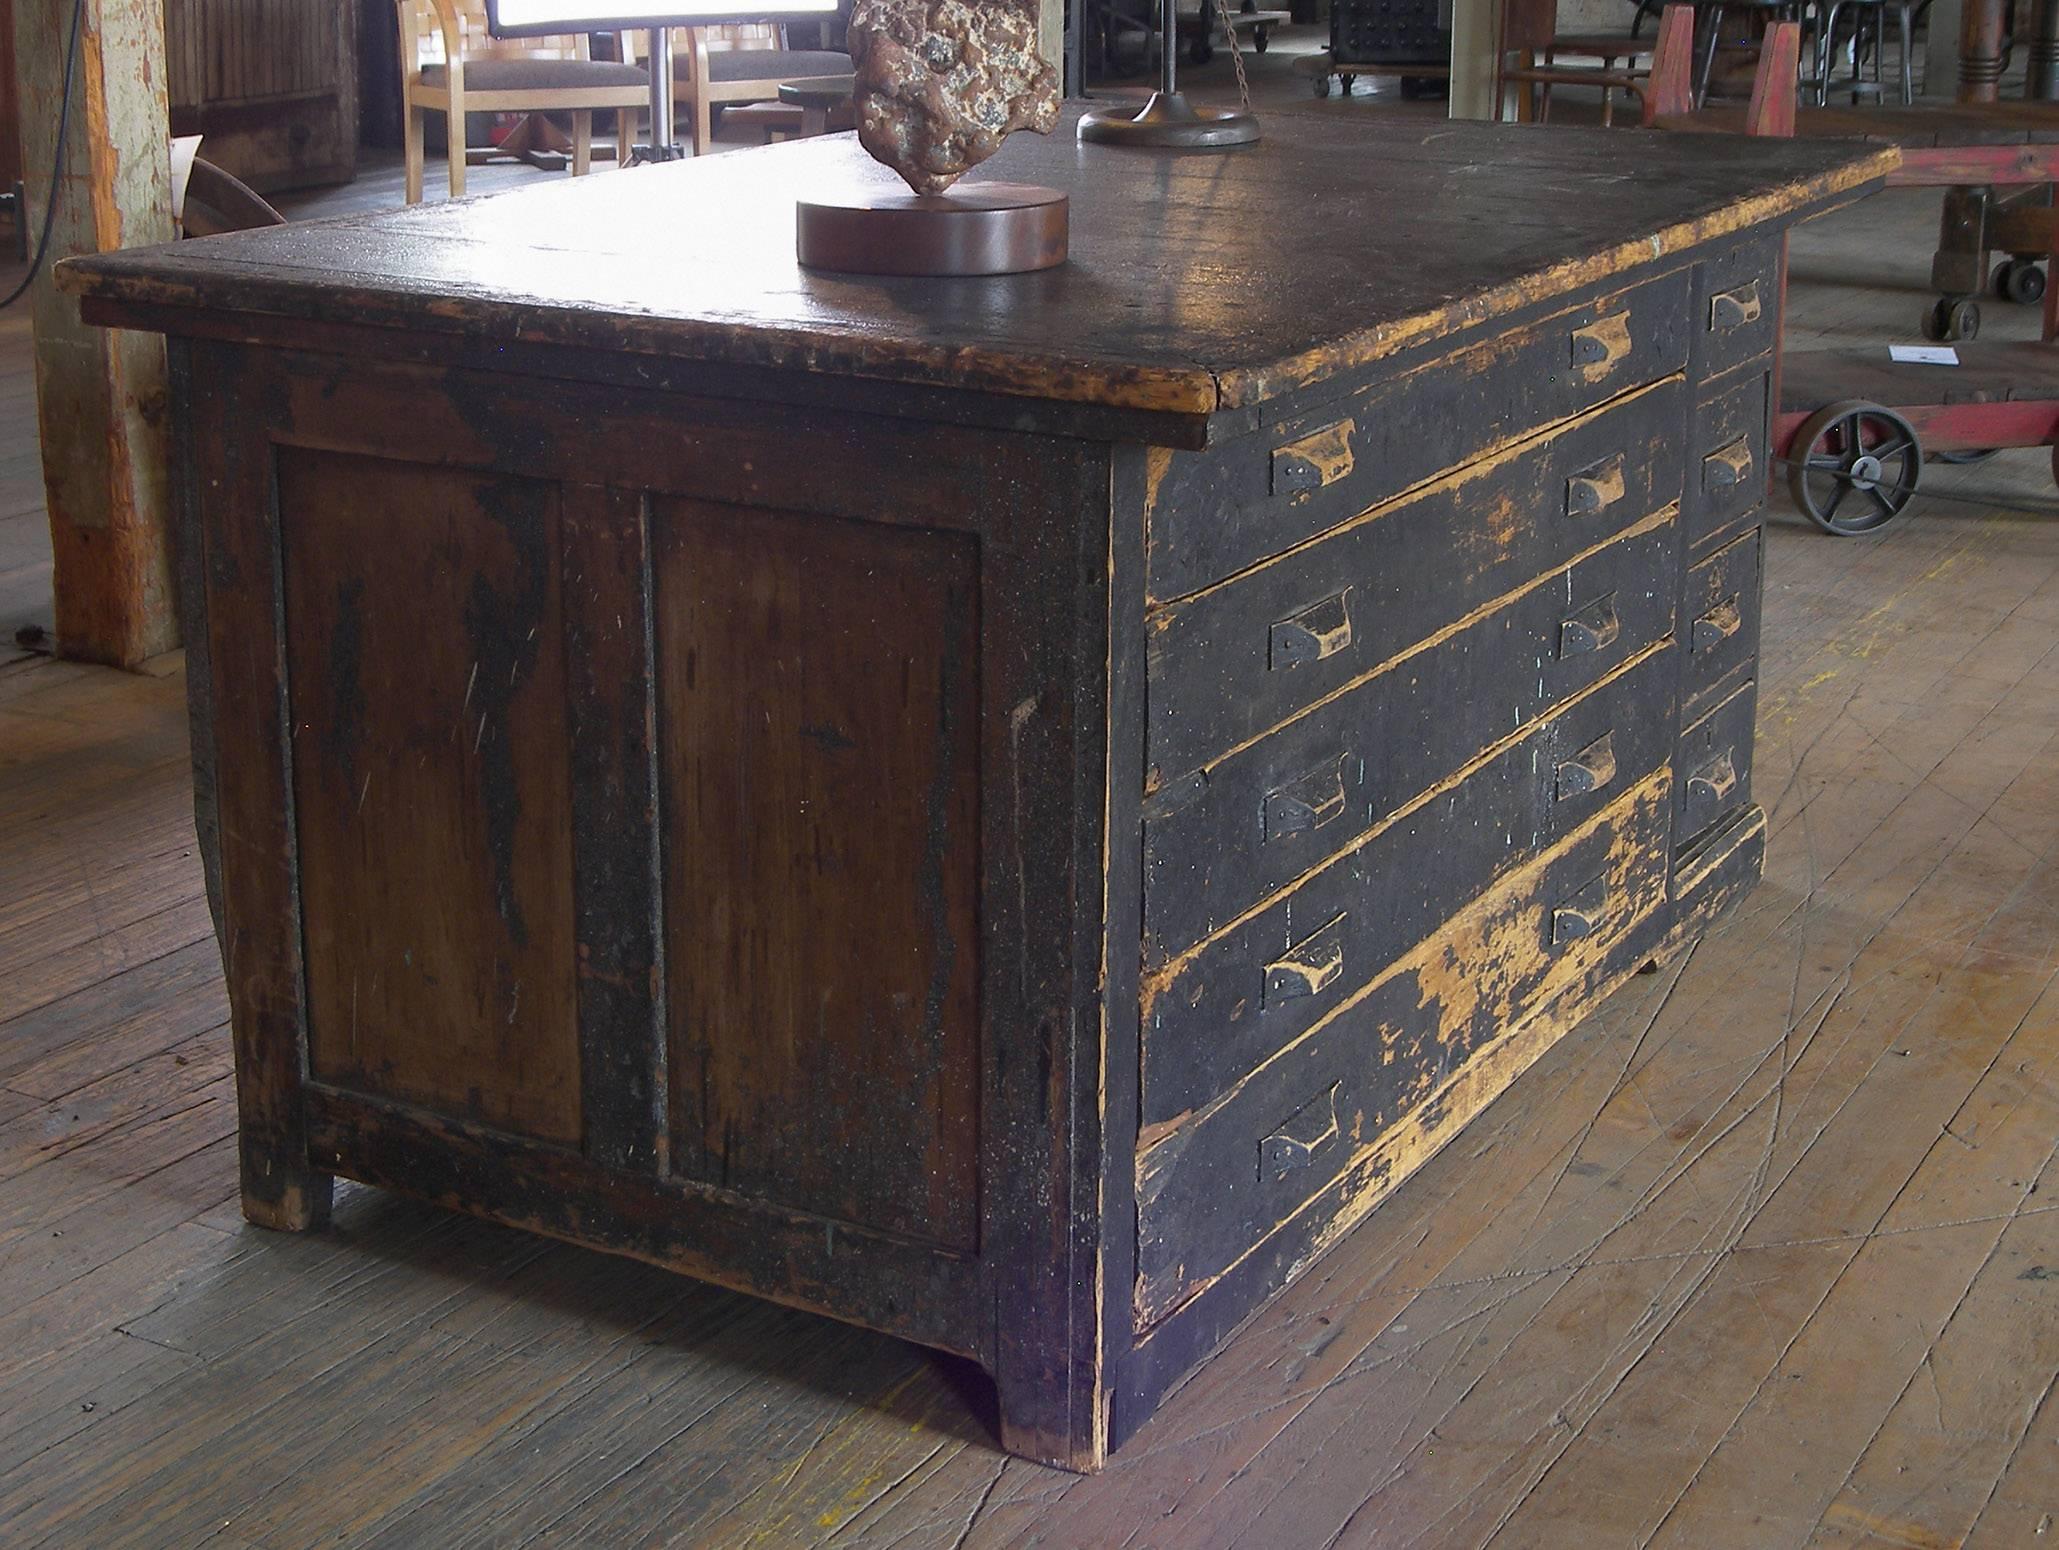 North American Vintage Industrial Antique Wooden Printers Cabinet with Storage Drawers